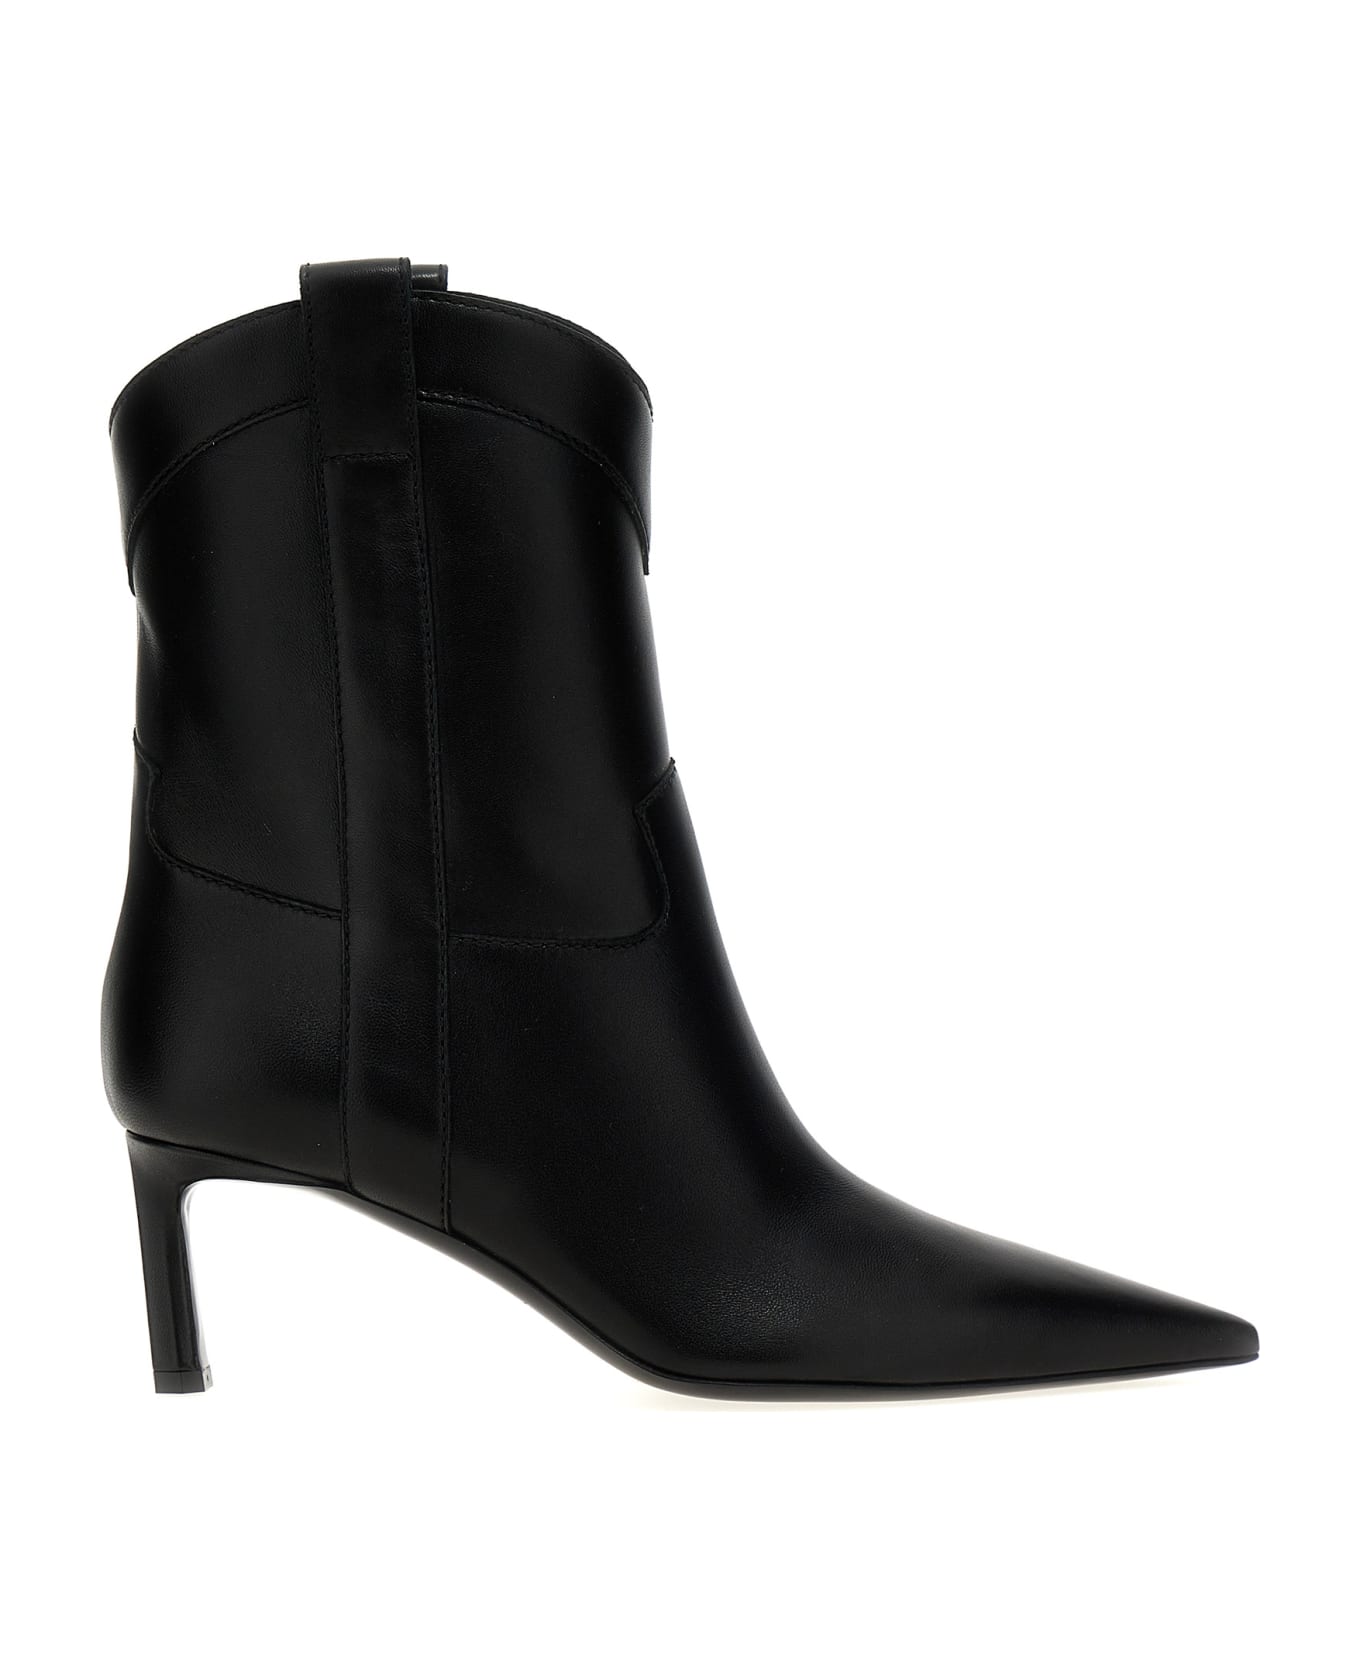 Sergio Rossi 'guadalupe' Ankle Boots - Black   ブーツ